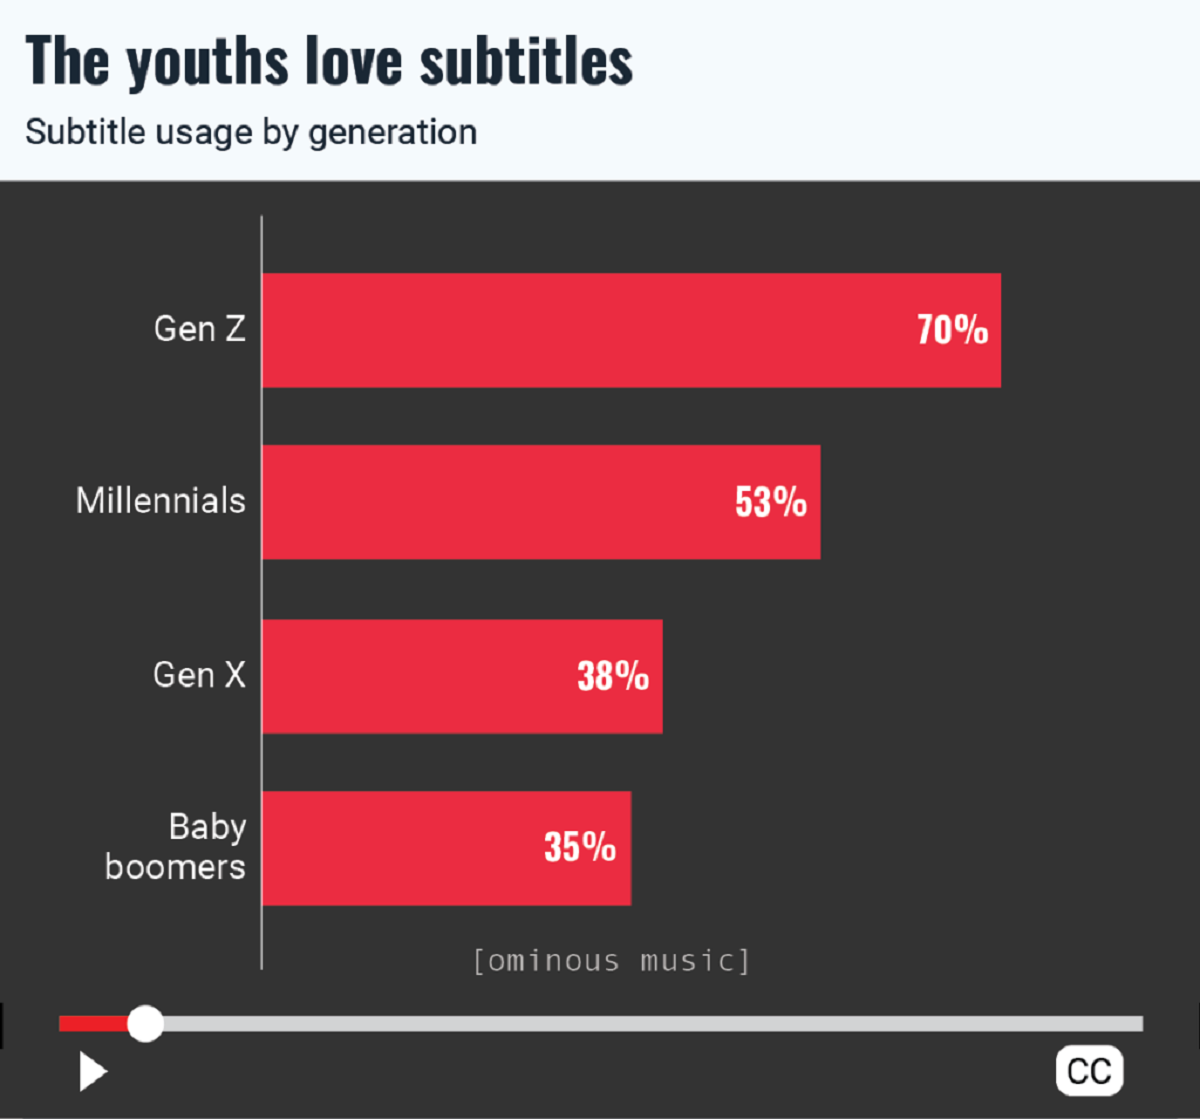 Why Does Gen Z Use Subtitles